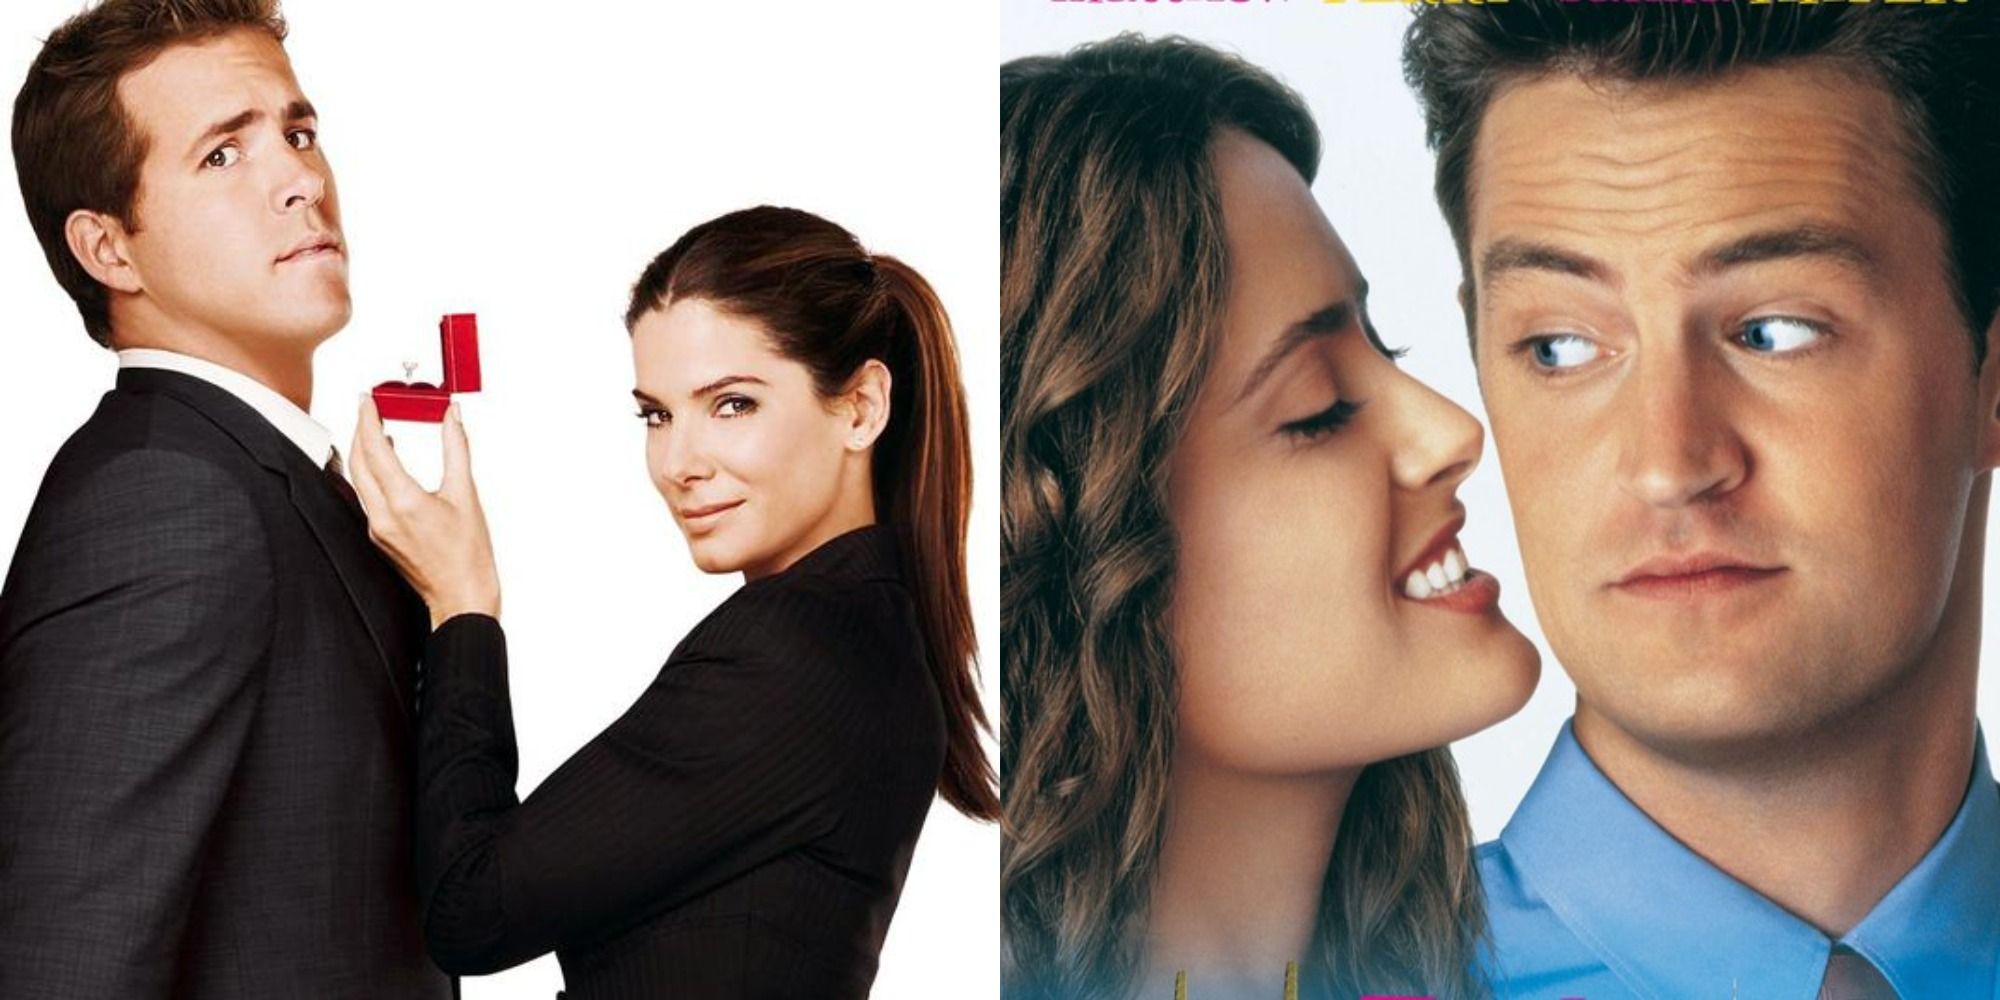 Split image showing characters from The Proposal and Fools Rush In